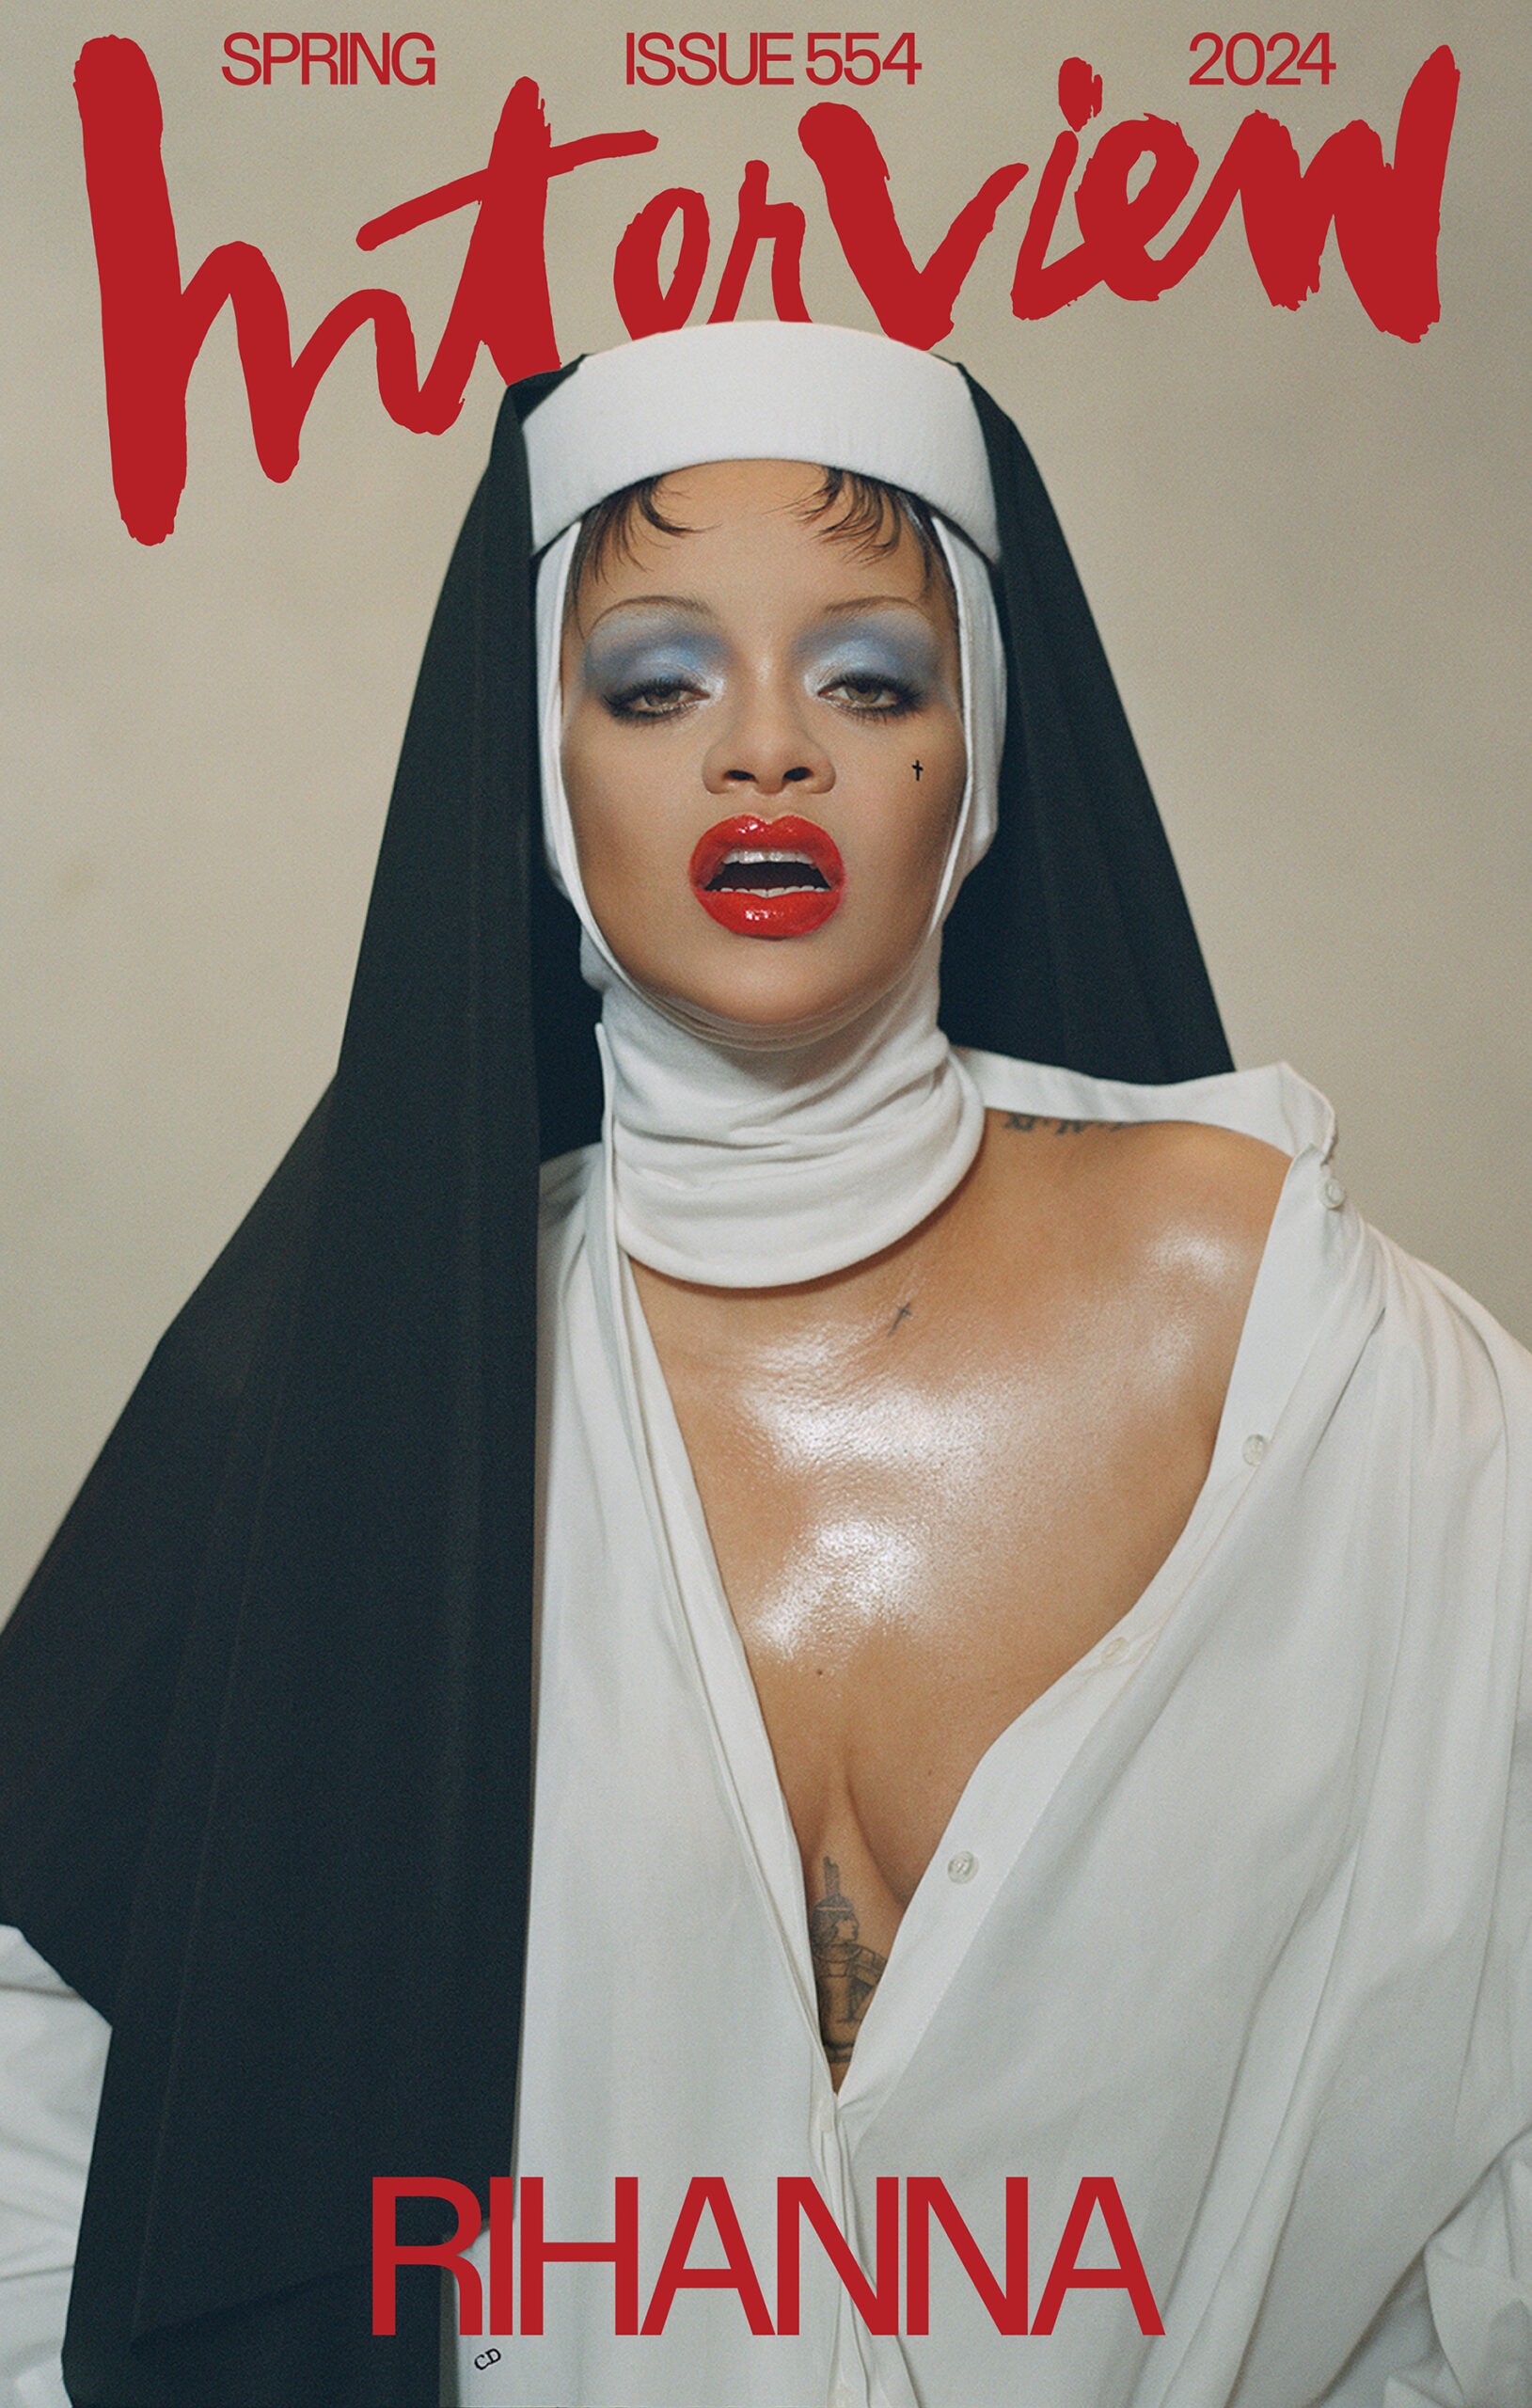 interview-spring-2024-rihanna-cover-scaled.jpg